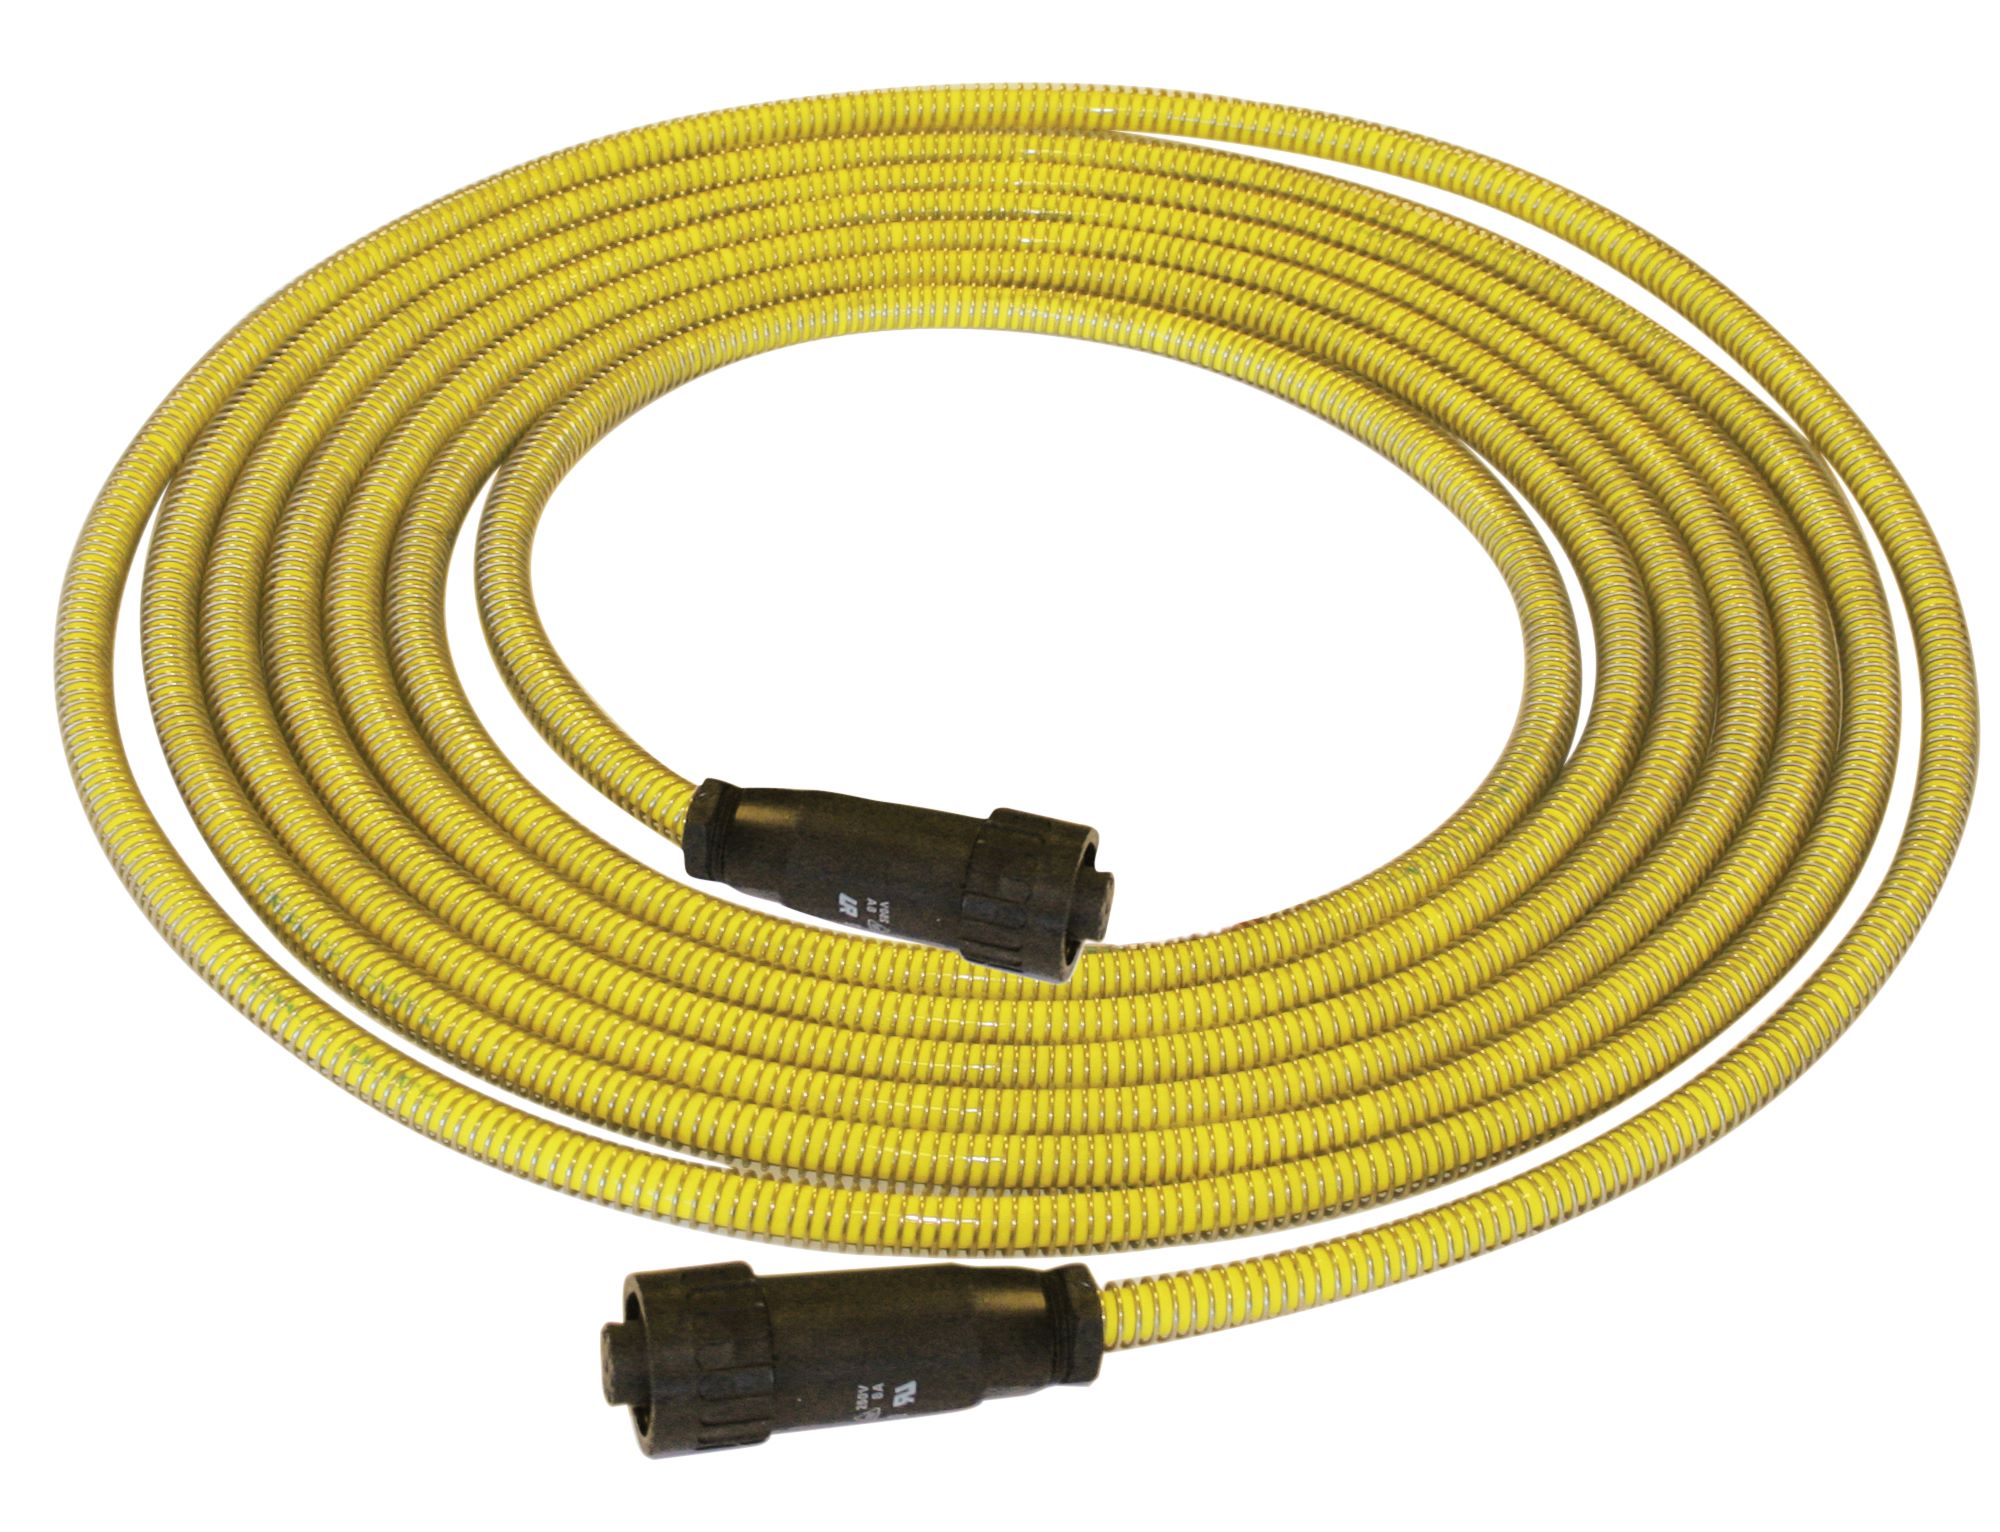 Load Bar Extension Cable - 5000kg